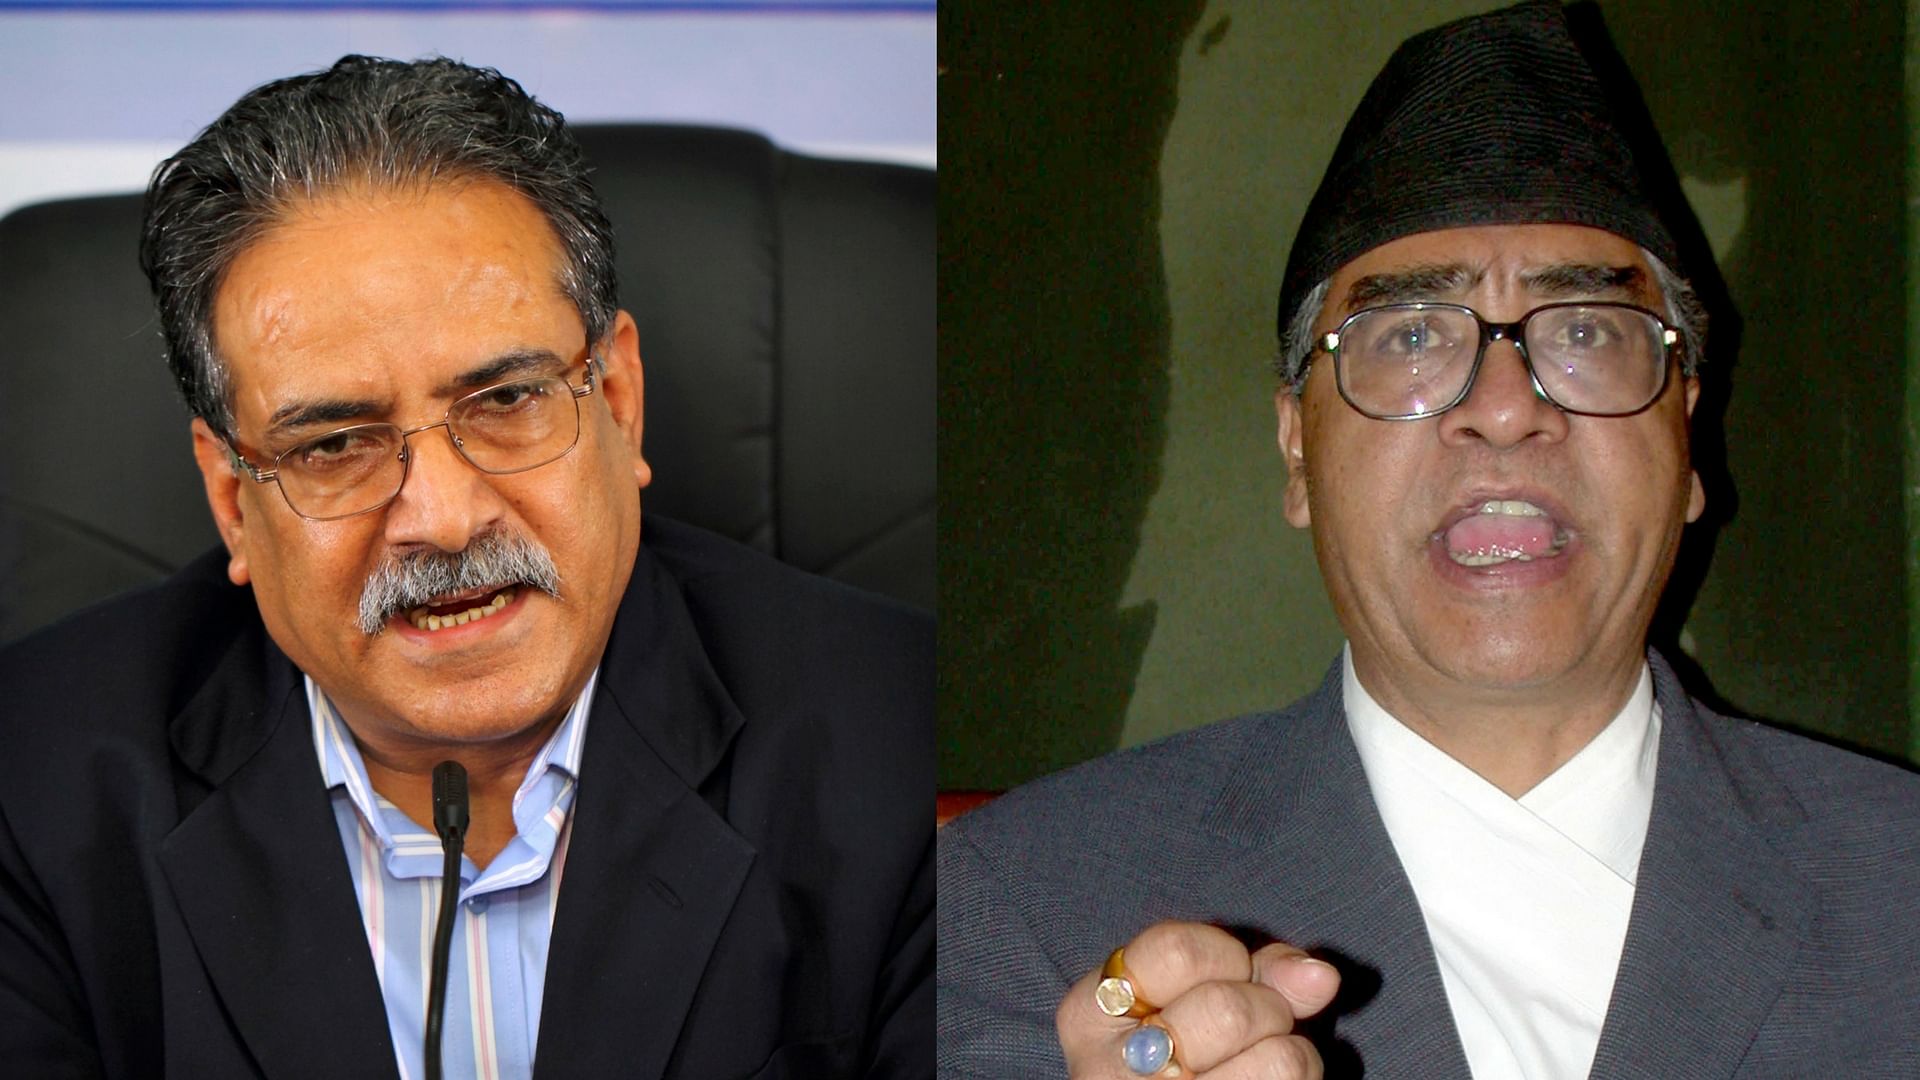 Prachanda (left) had an understanding with Sher Bahadur Deuba (right) that he would step down as prime minister and hand over the leadership to Deuba after nine months.